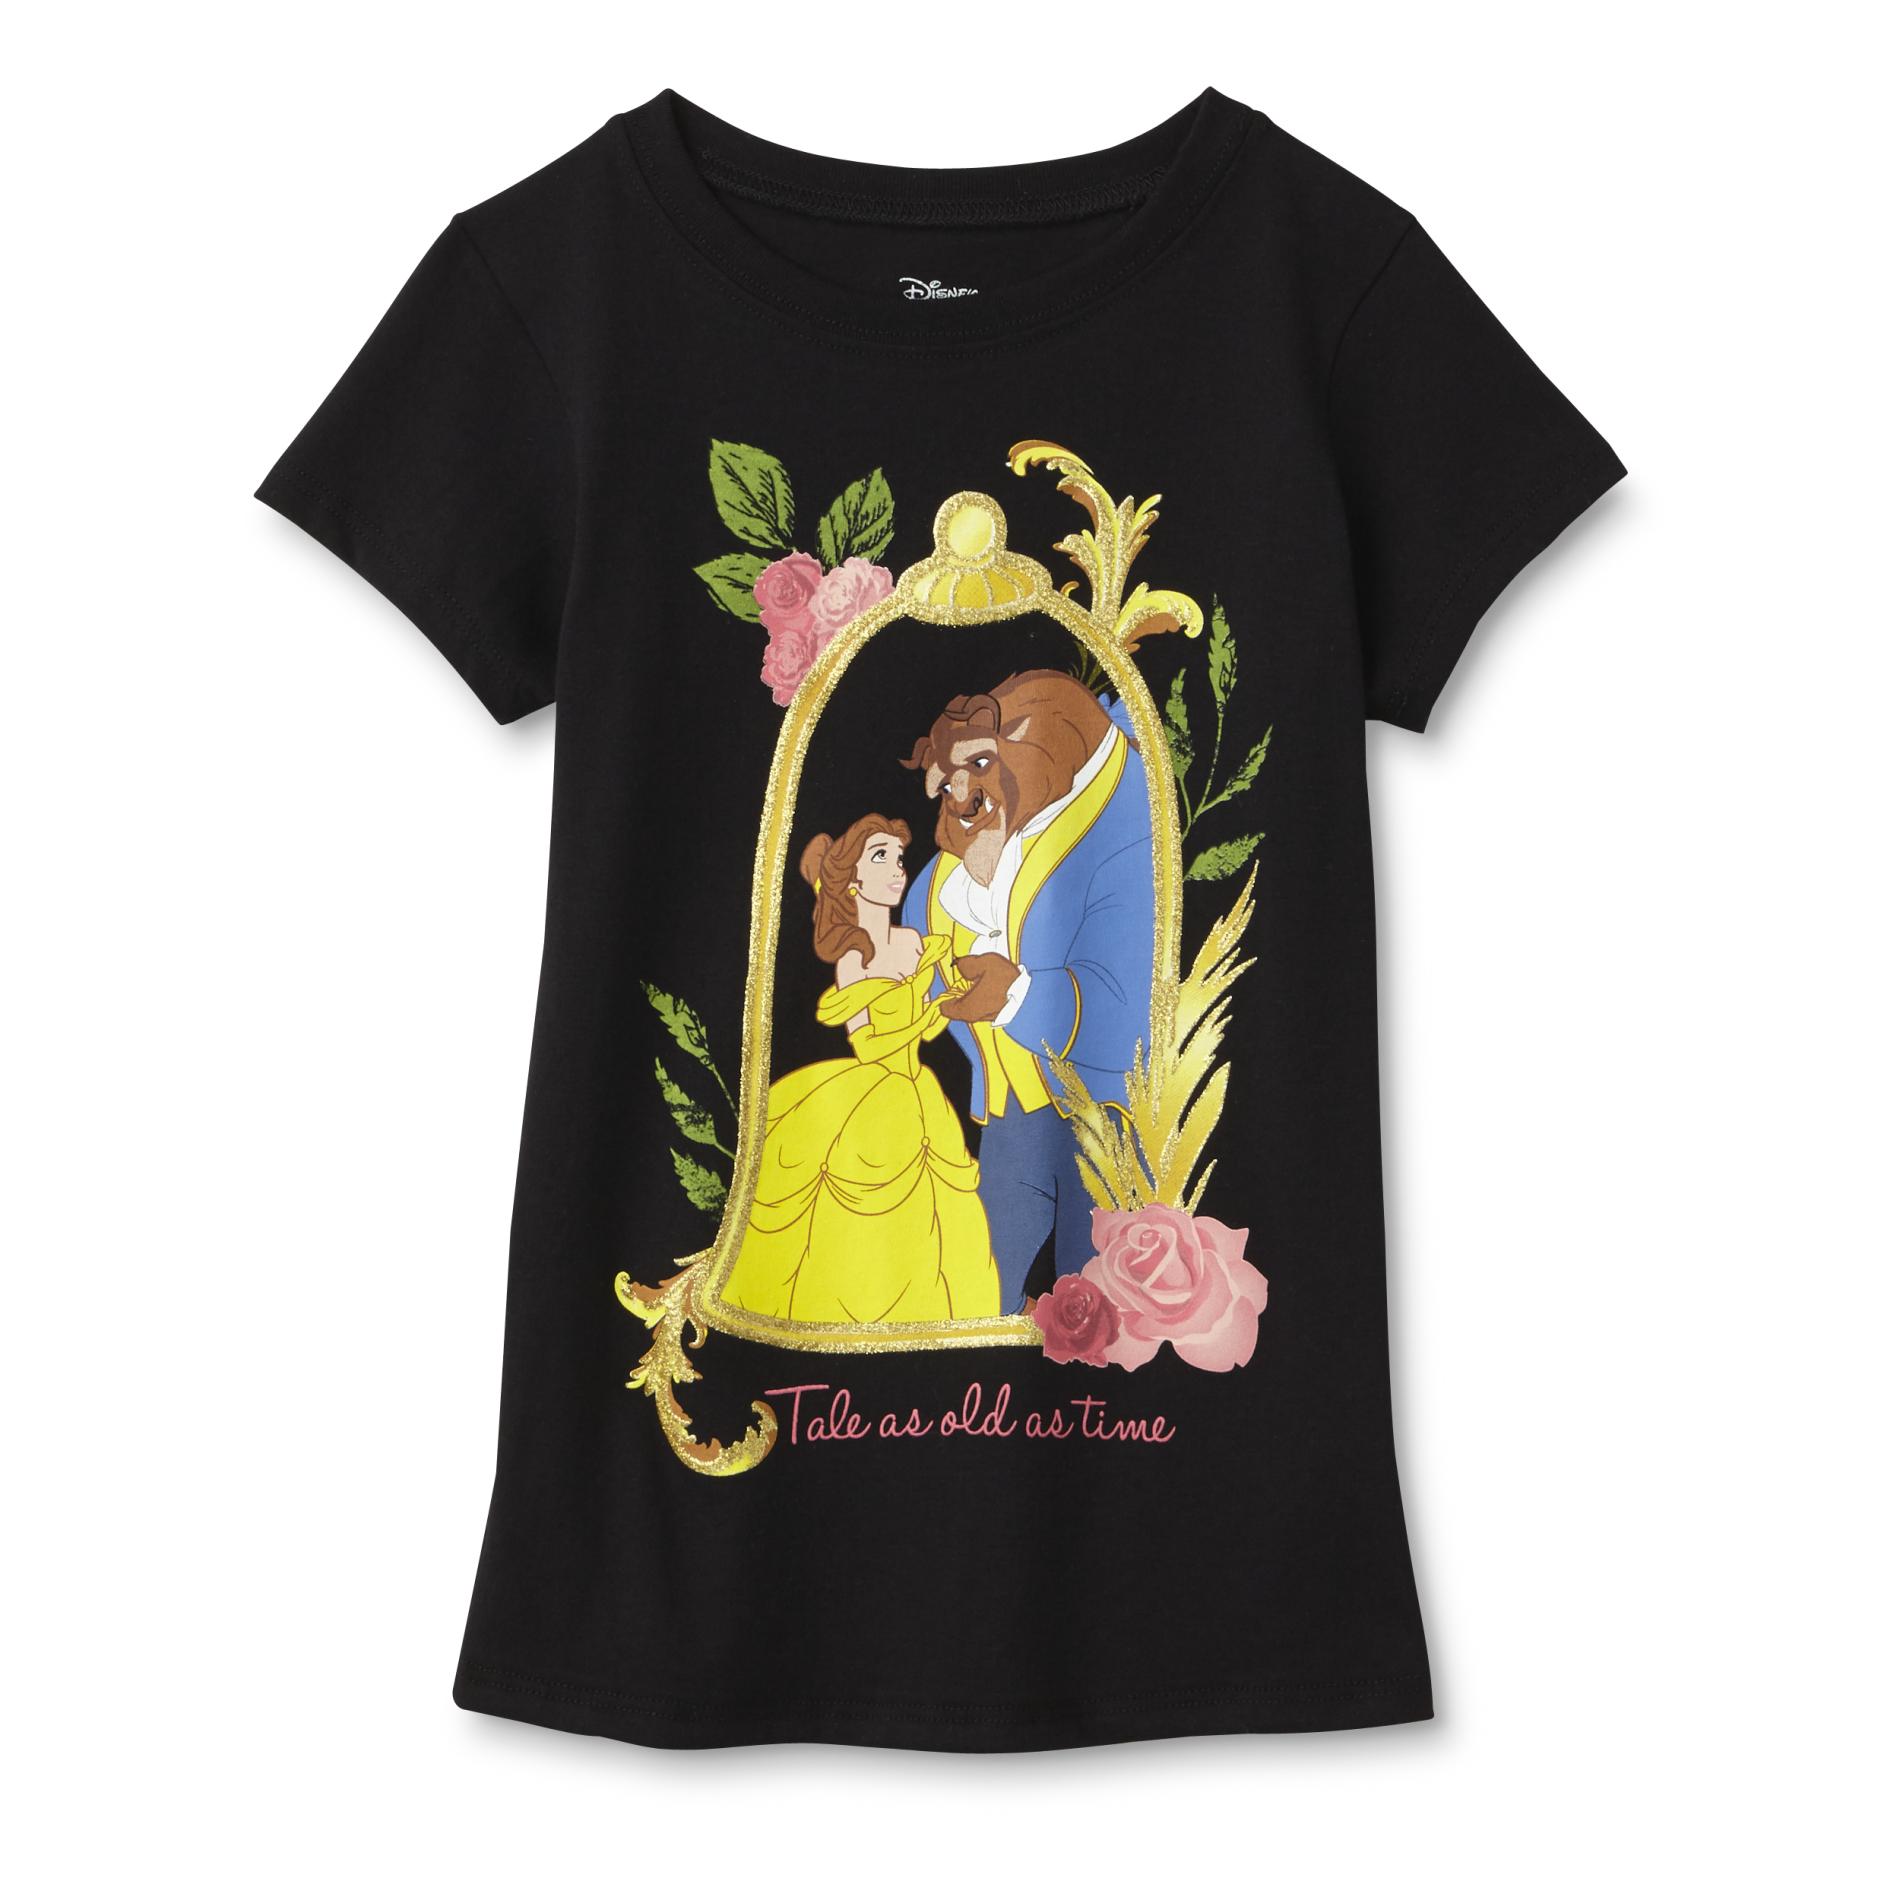 Disney Beauty and the Beast Girls' Graphic T-Shirt